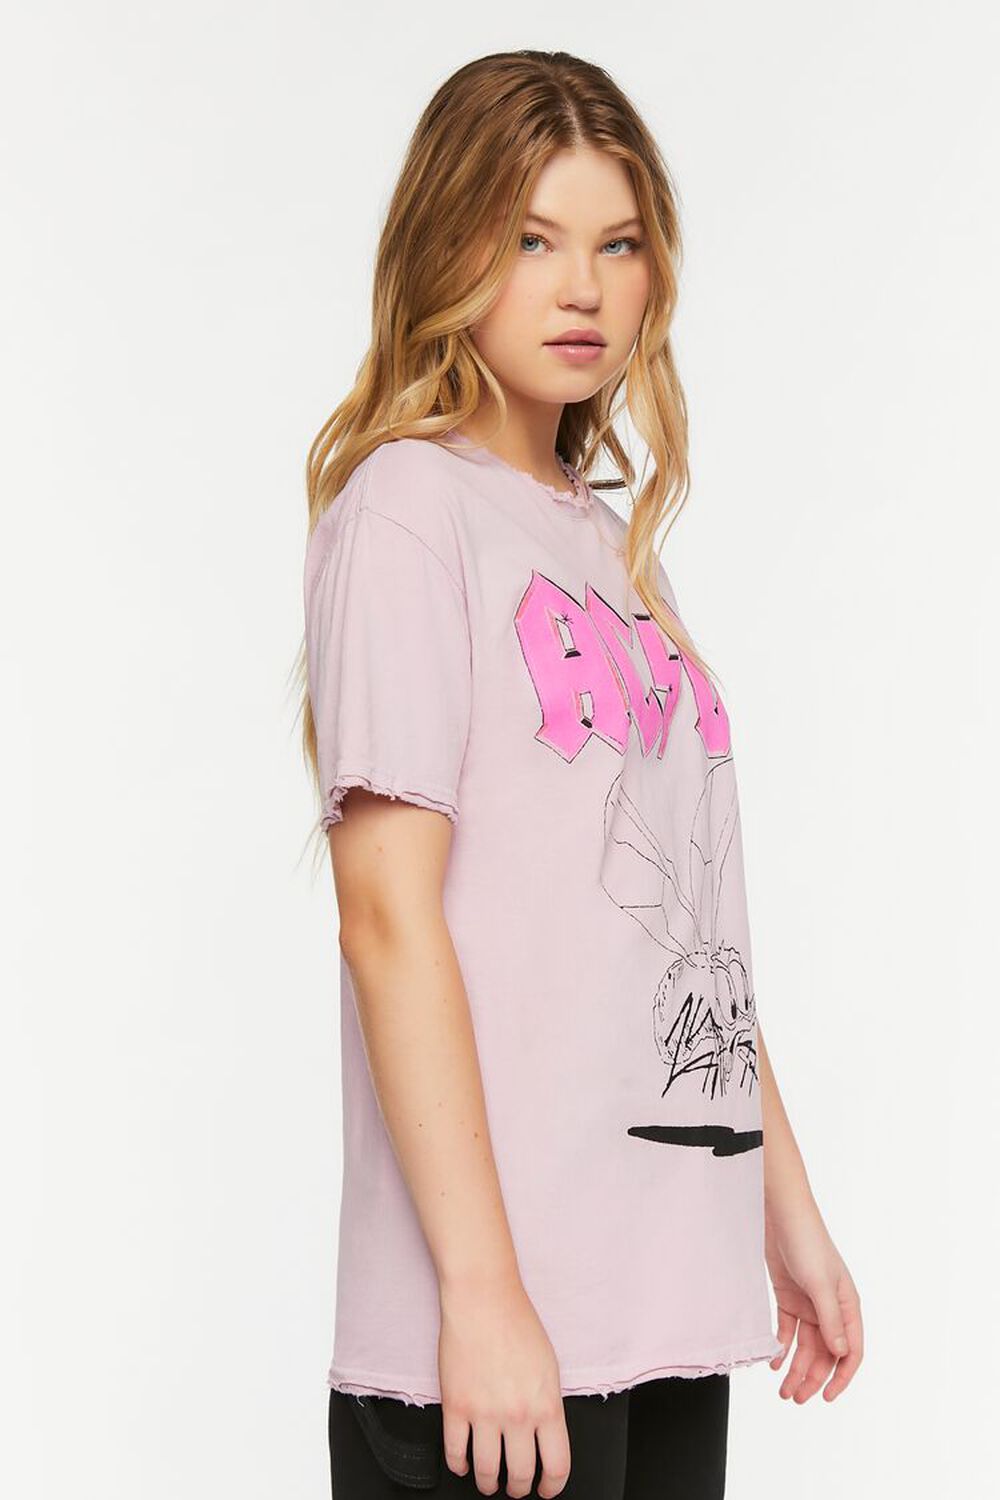 PINK/MULTI ACDC Distressed Graphic Tee, image 2